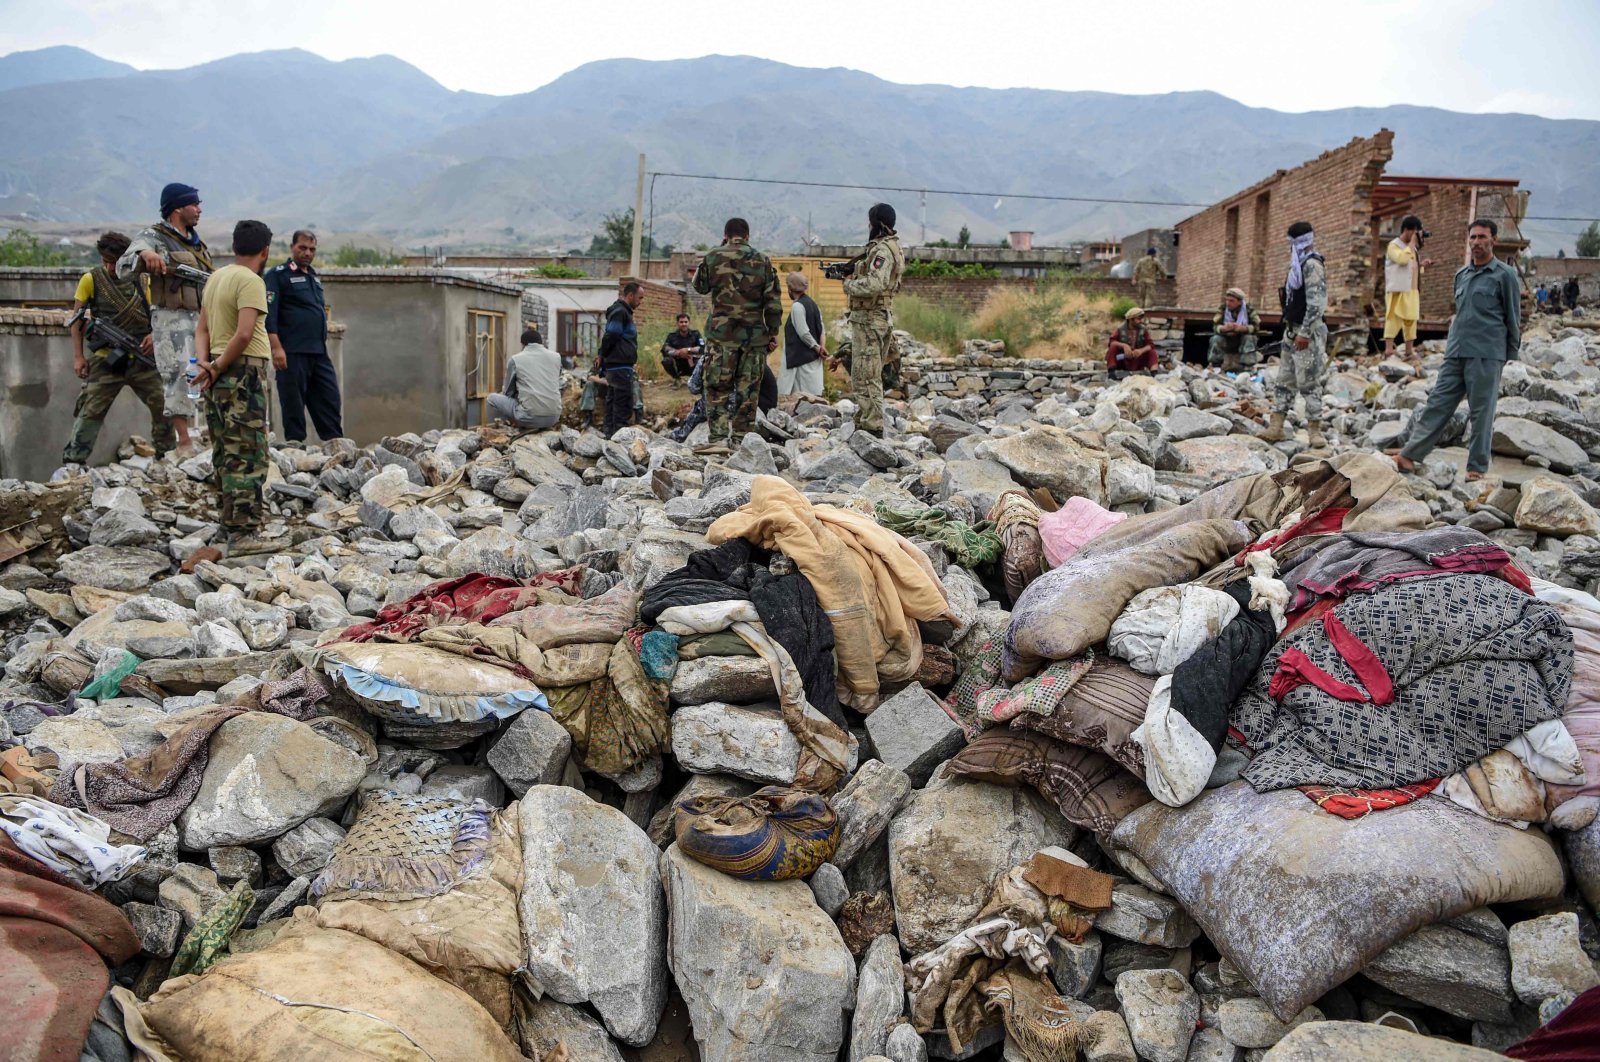 Villagers and security personnel gather after a flash flood affected the area at Sayrah-e-Hopiyan in Charikar, Parwan province, Afghanistan, Aug. 26, 2020. (AFP Photo)